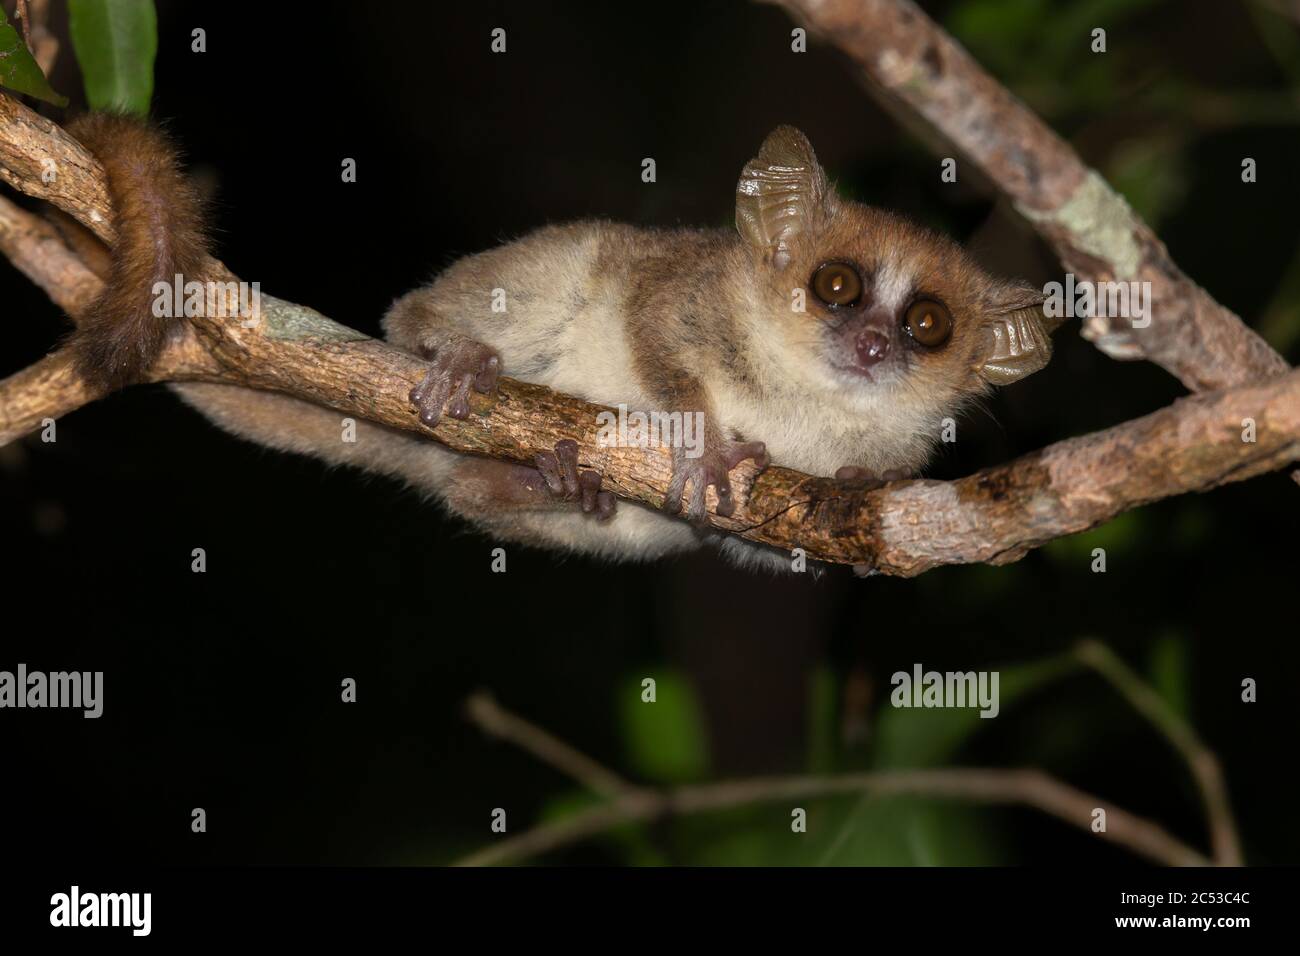 One little mouse lemur on a branch, taken at night Stock Photo